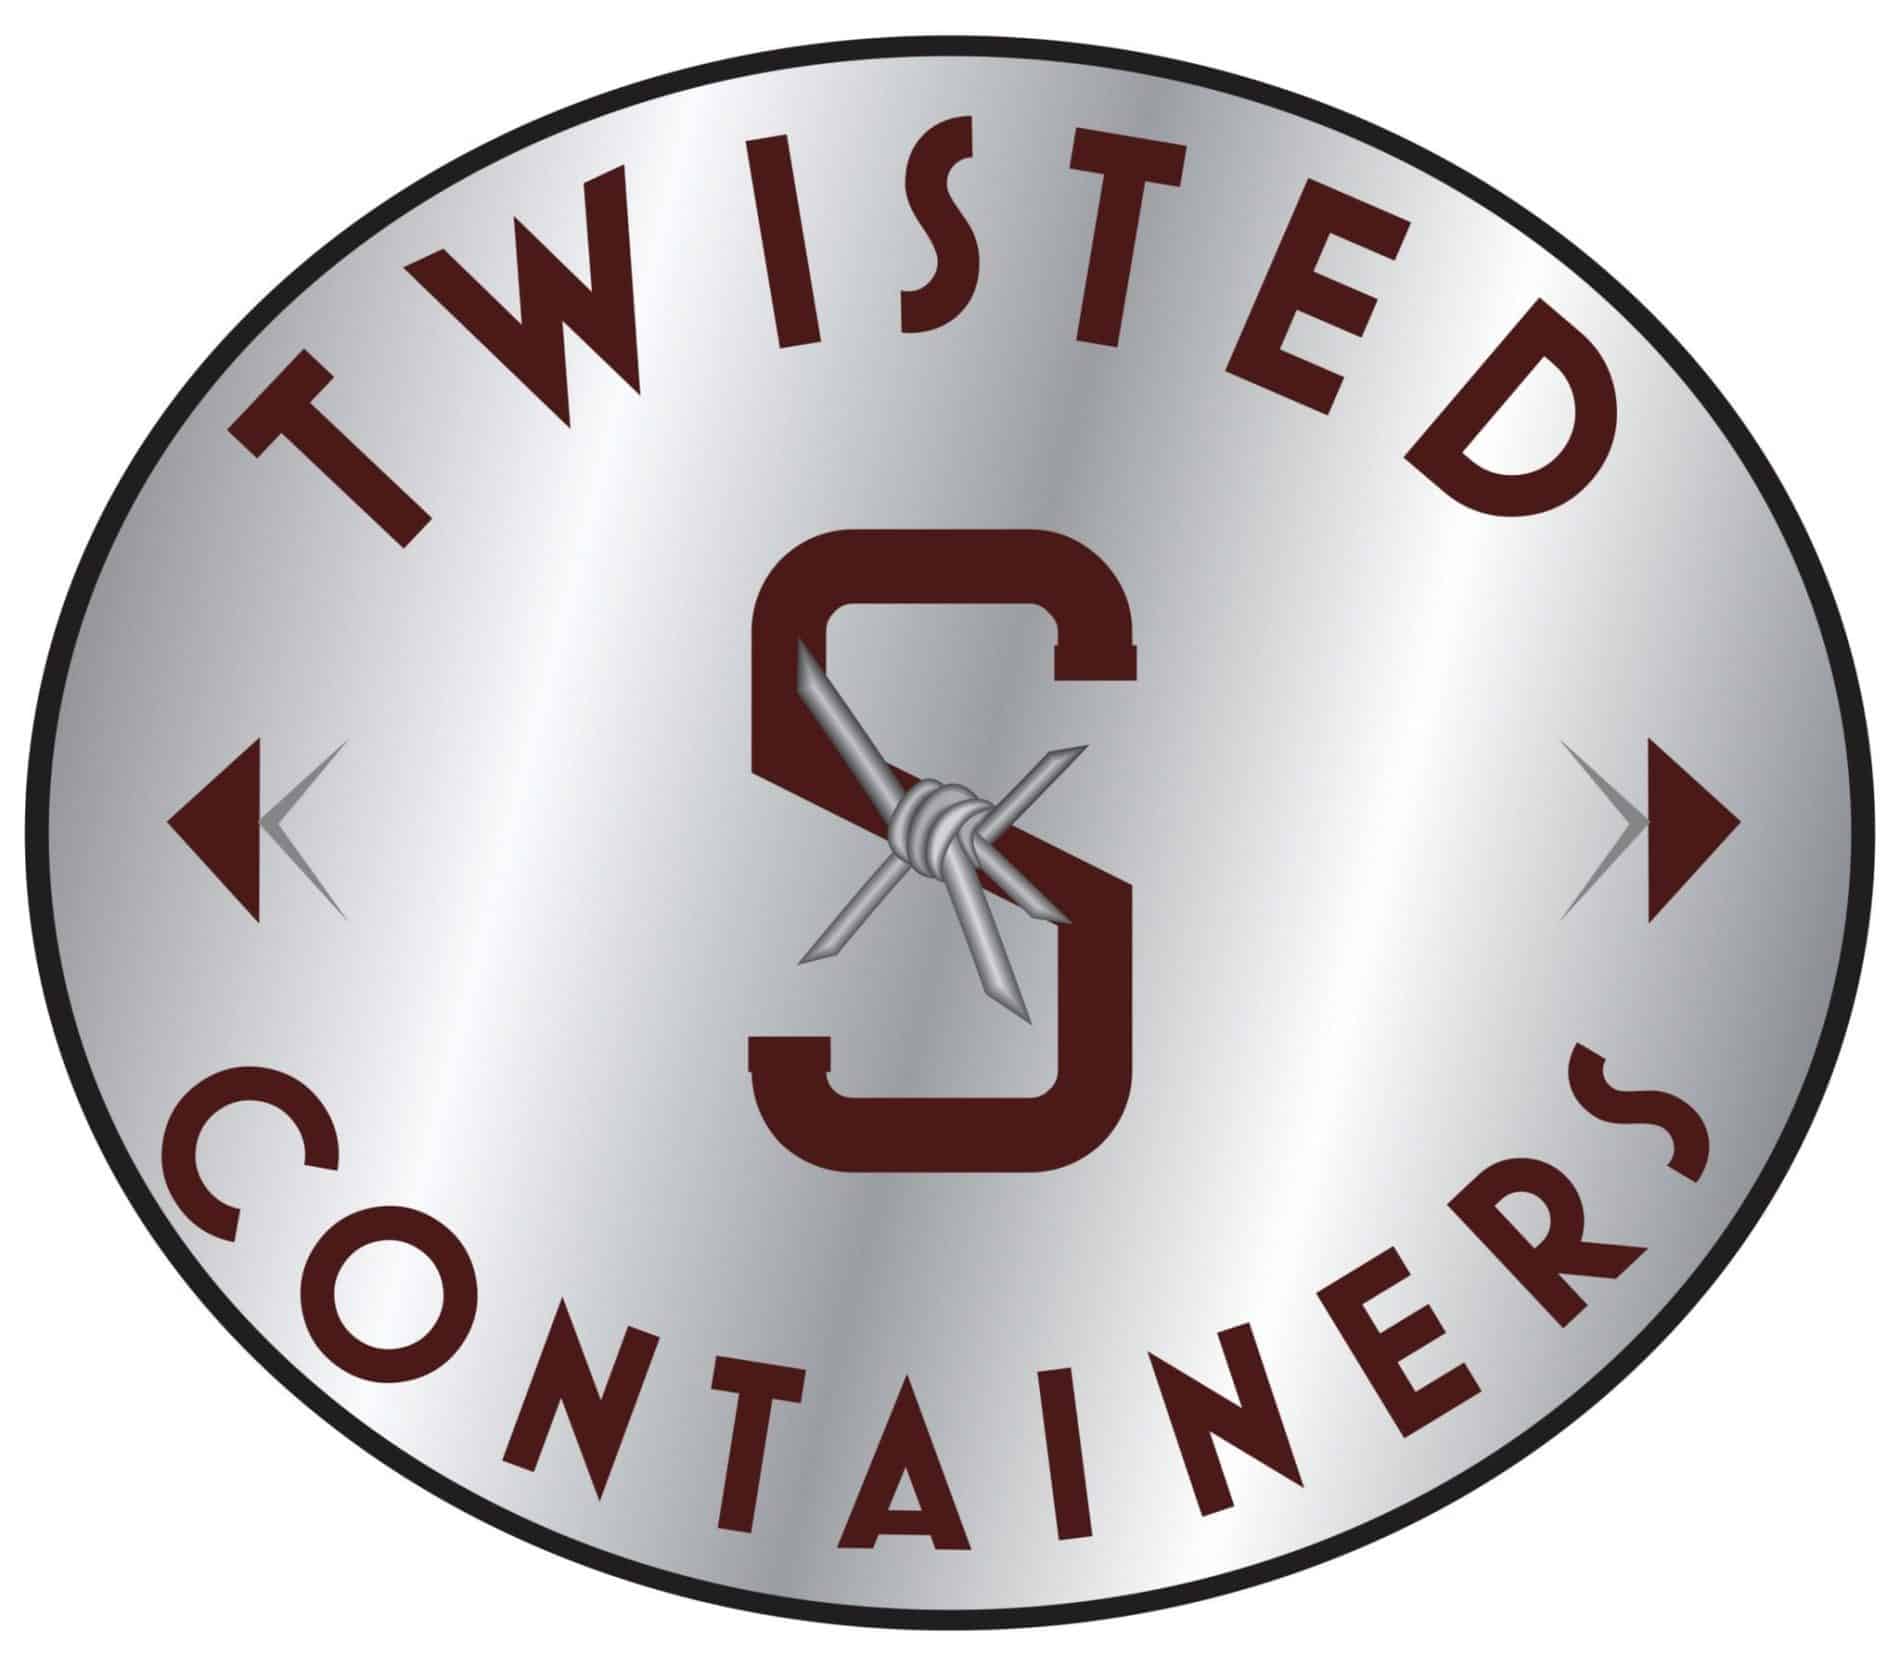 https://tscok.com/wp-content/uploads/2018/12/Twisted-S-Containers-New-and-Used-Shipping-Containers.jpg